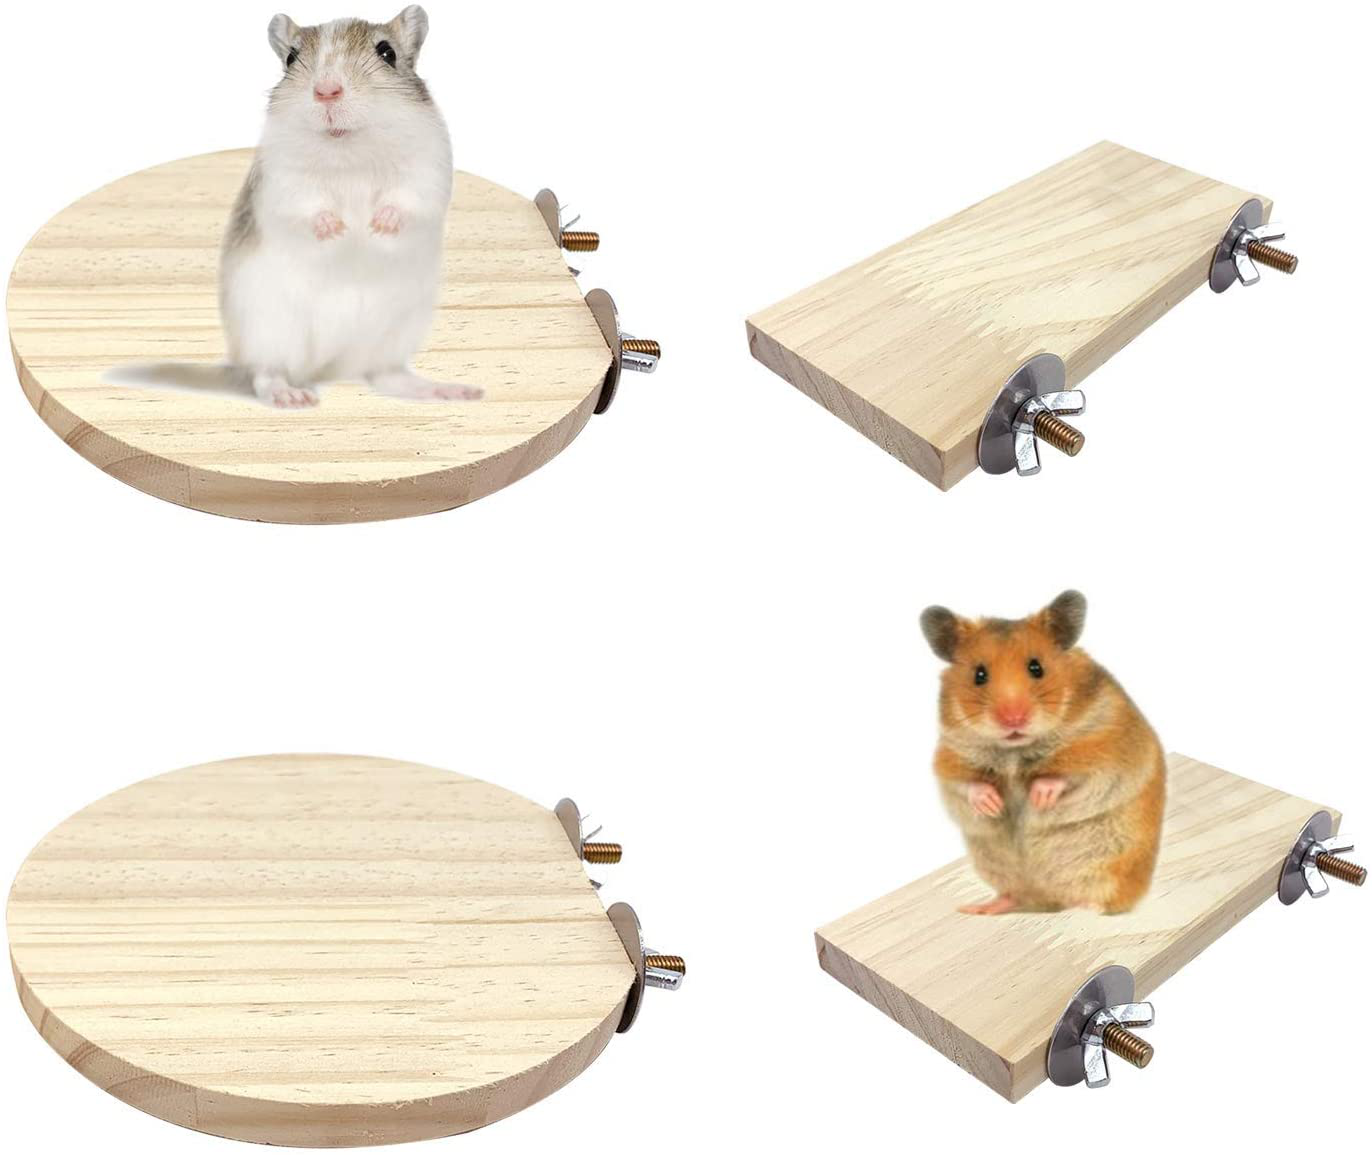 Tfwadmx Natural Wooden Hamster Stand Platform Guinea Pigs Climbing Exercise Toy Lookout Platform Gerbil Activity Playground for Squirrel Chinchilla Dwarf Parrot and Small Animals Cage Accessories